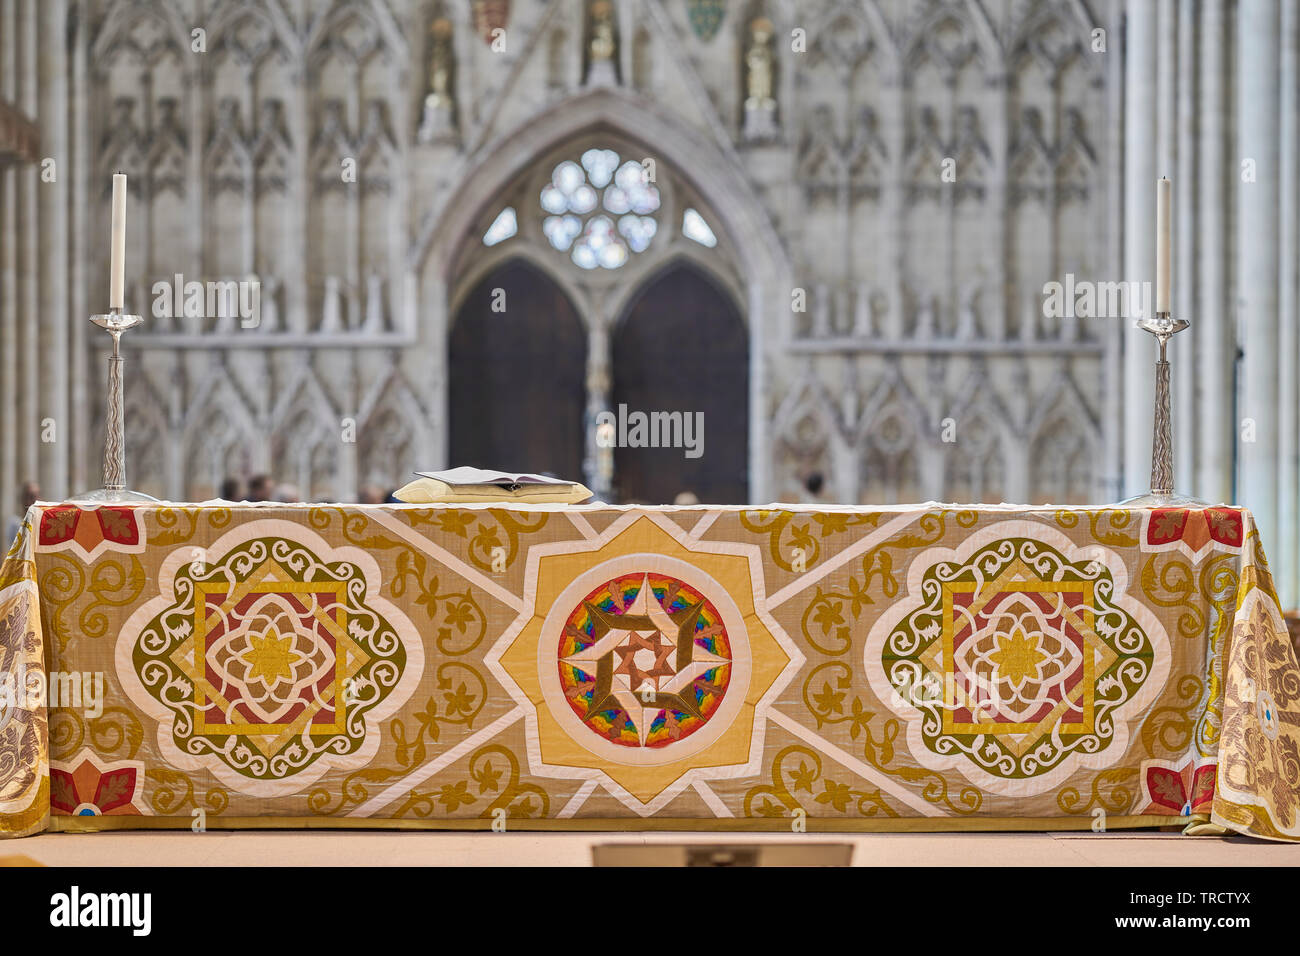 Decorated cloth on a main altar at York minster cathedral, England. Stock Photo